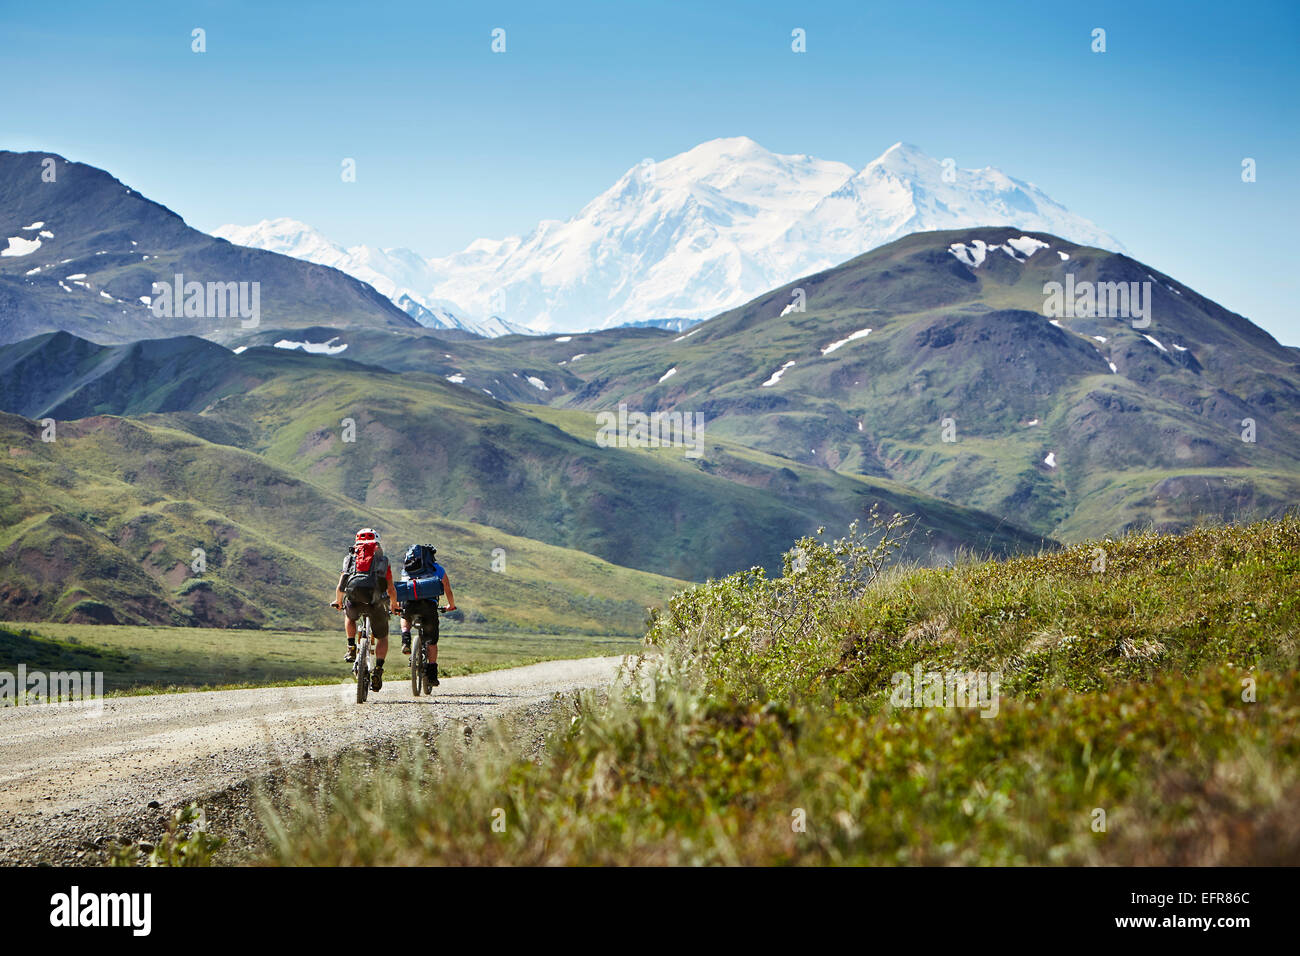 Mid adult couple cycling on rural road, Mount McKinley, Denali National Park, Alaska, USA Stock Photo